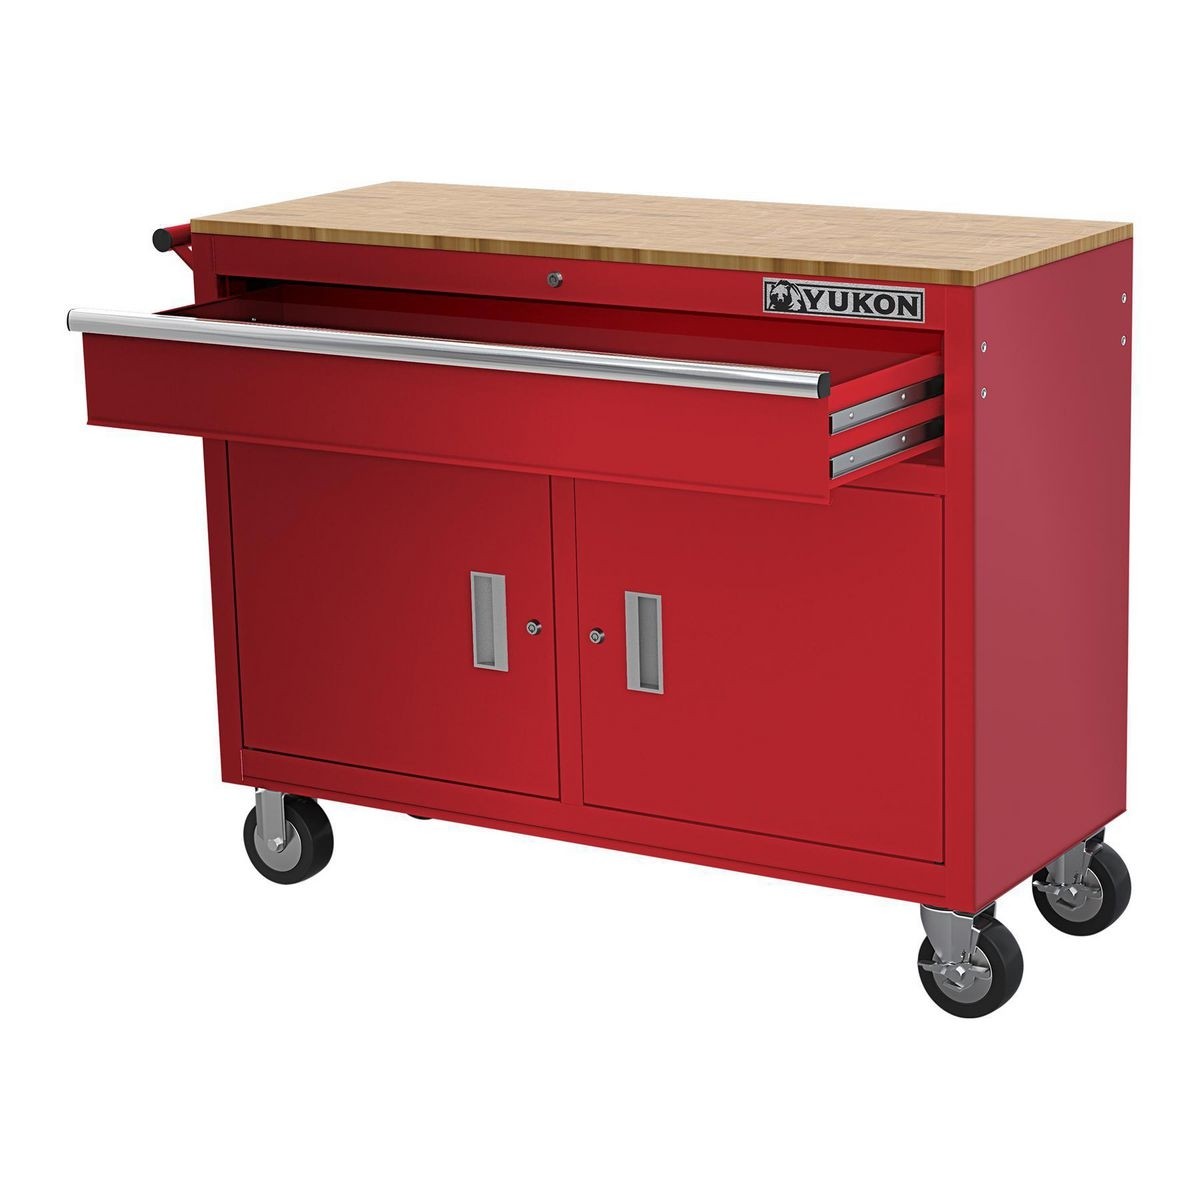 YUKON 46 In. Mobile Workbench With Solid Wood Top - Red – Item 57779